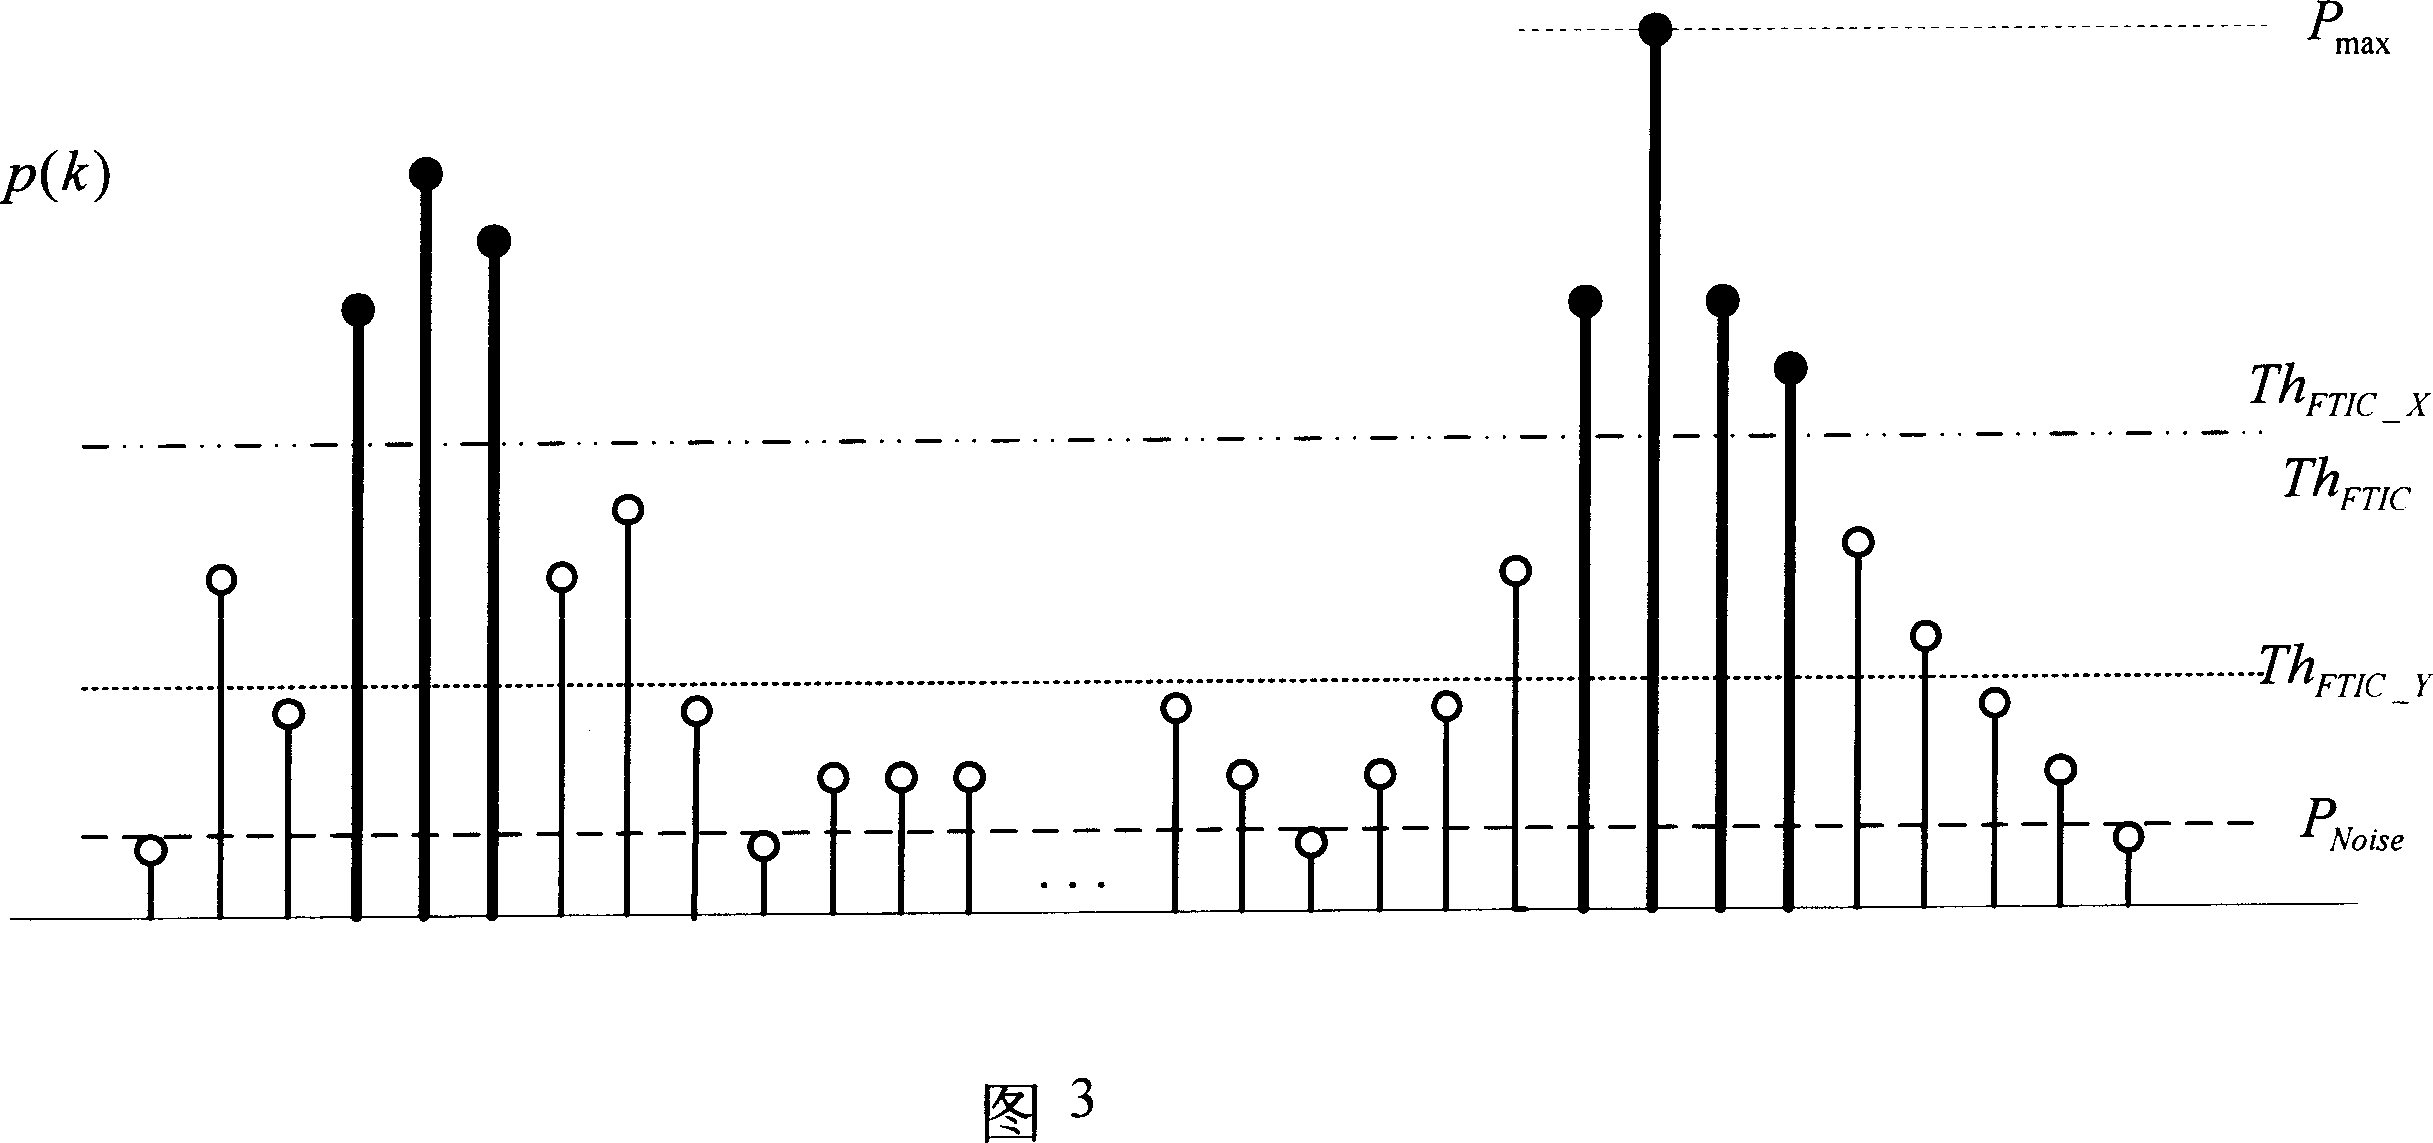 Multi-cell channel estimation method based on elimination of serial interference